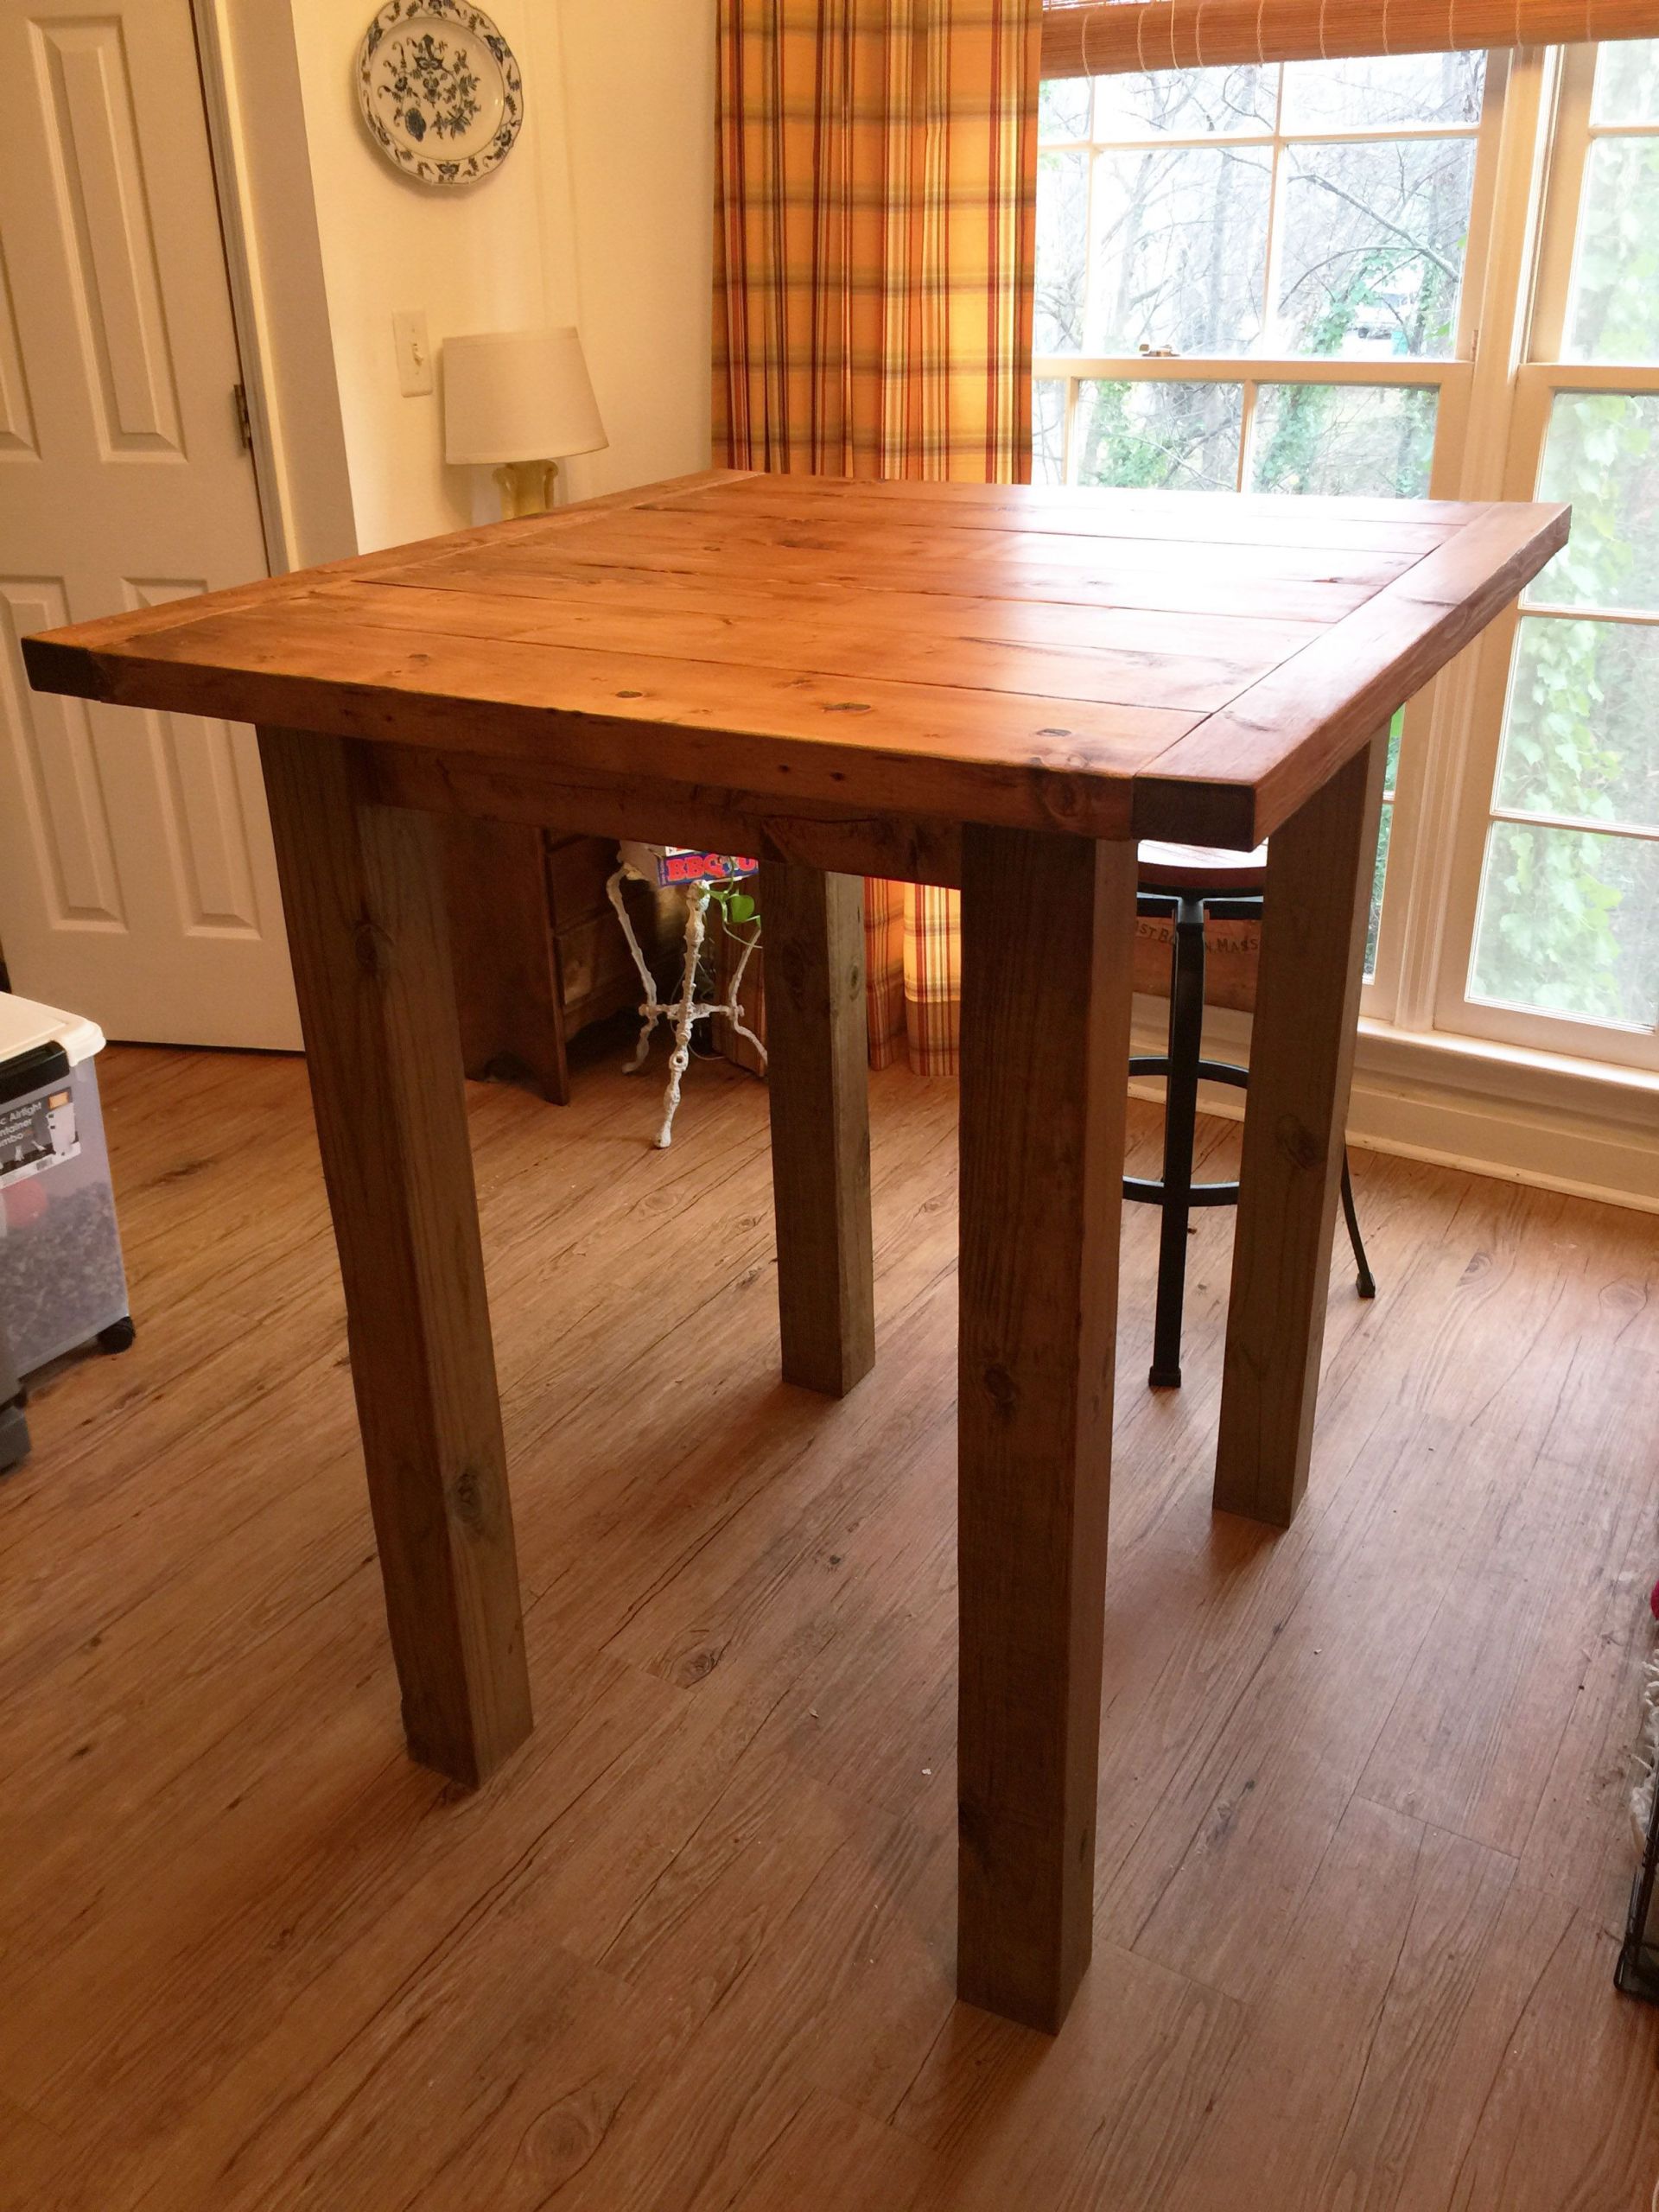 Diy Small Kitchen Table
 Ana White Small Pub Table DIY Projects